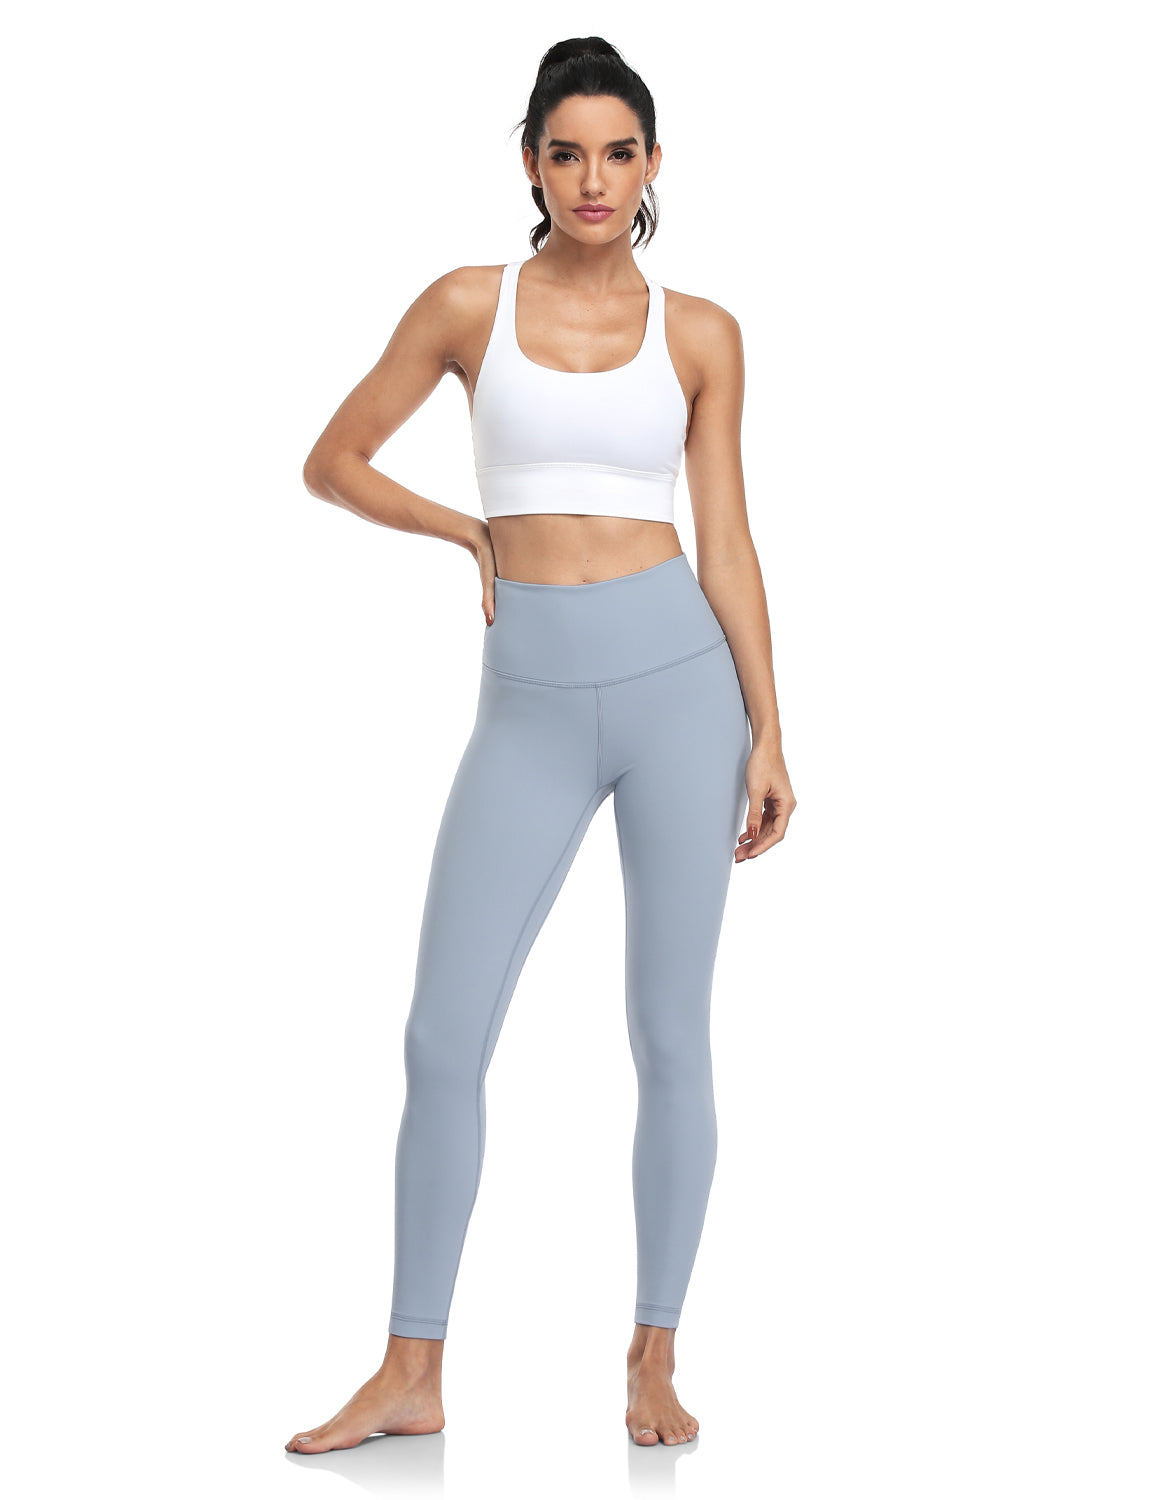  HeyNuts Essential High Waisted Yoga Leggings For Tall Women,  Buttery Soft Full Length Workout Pants 28 Diamond Dye Dazzling Blue XL